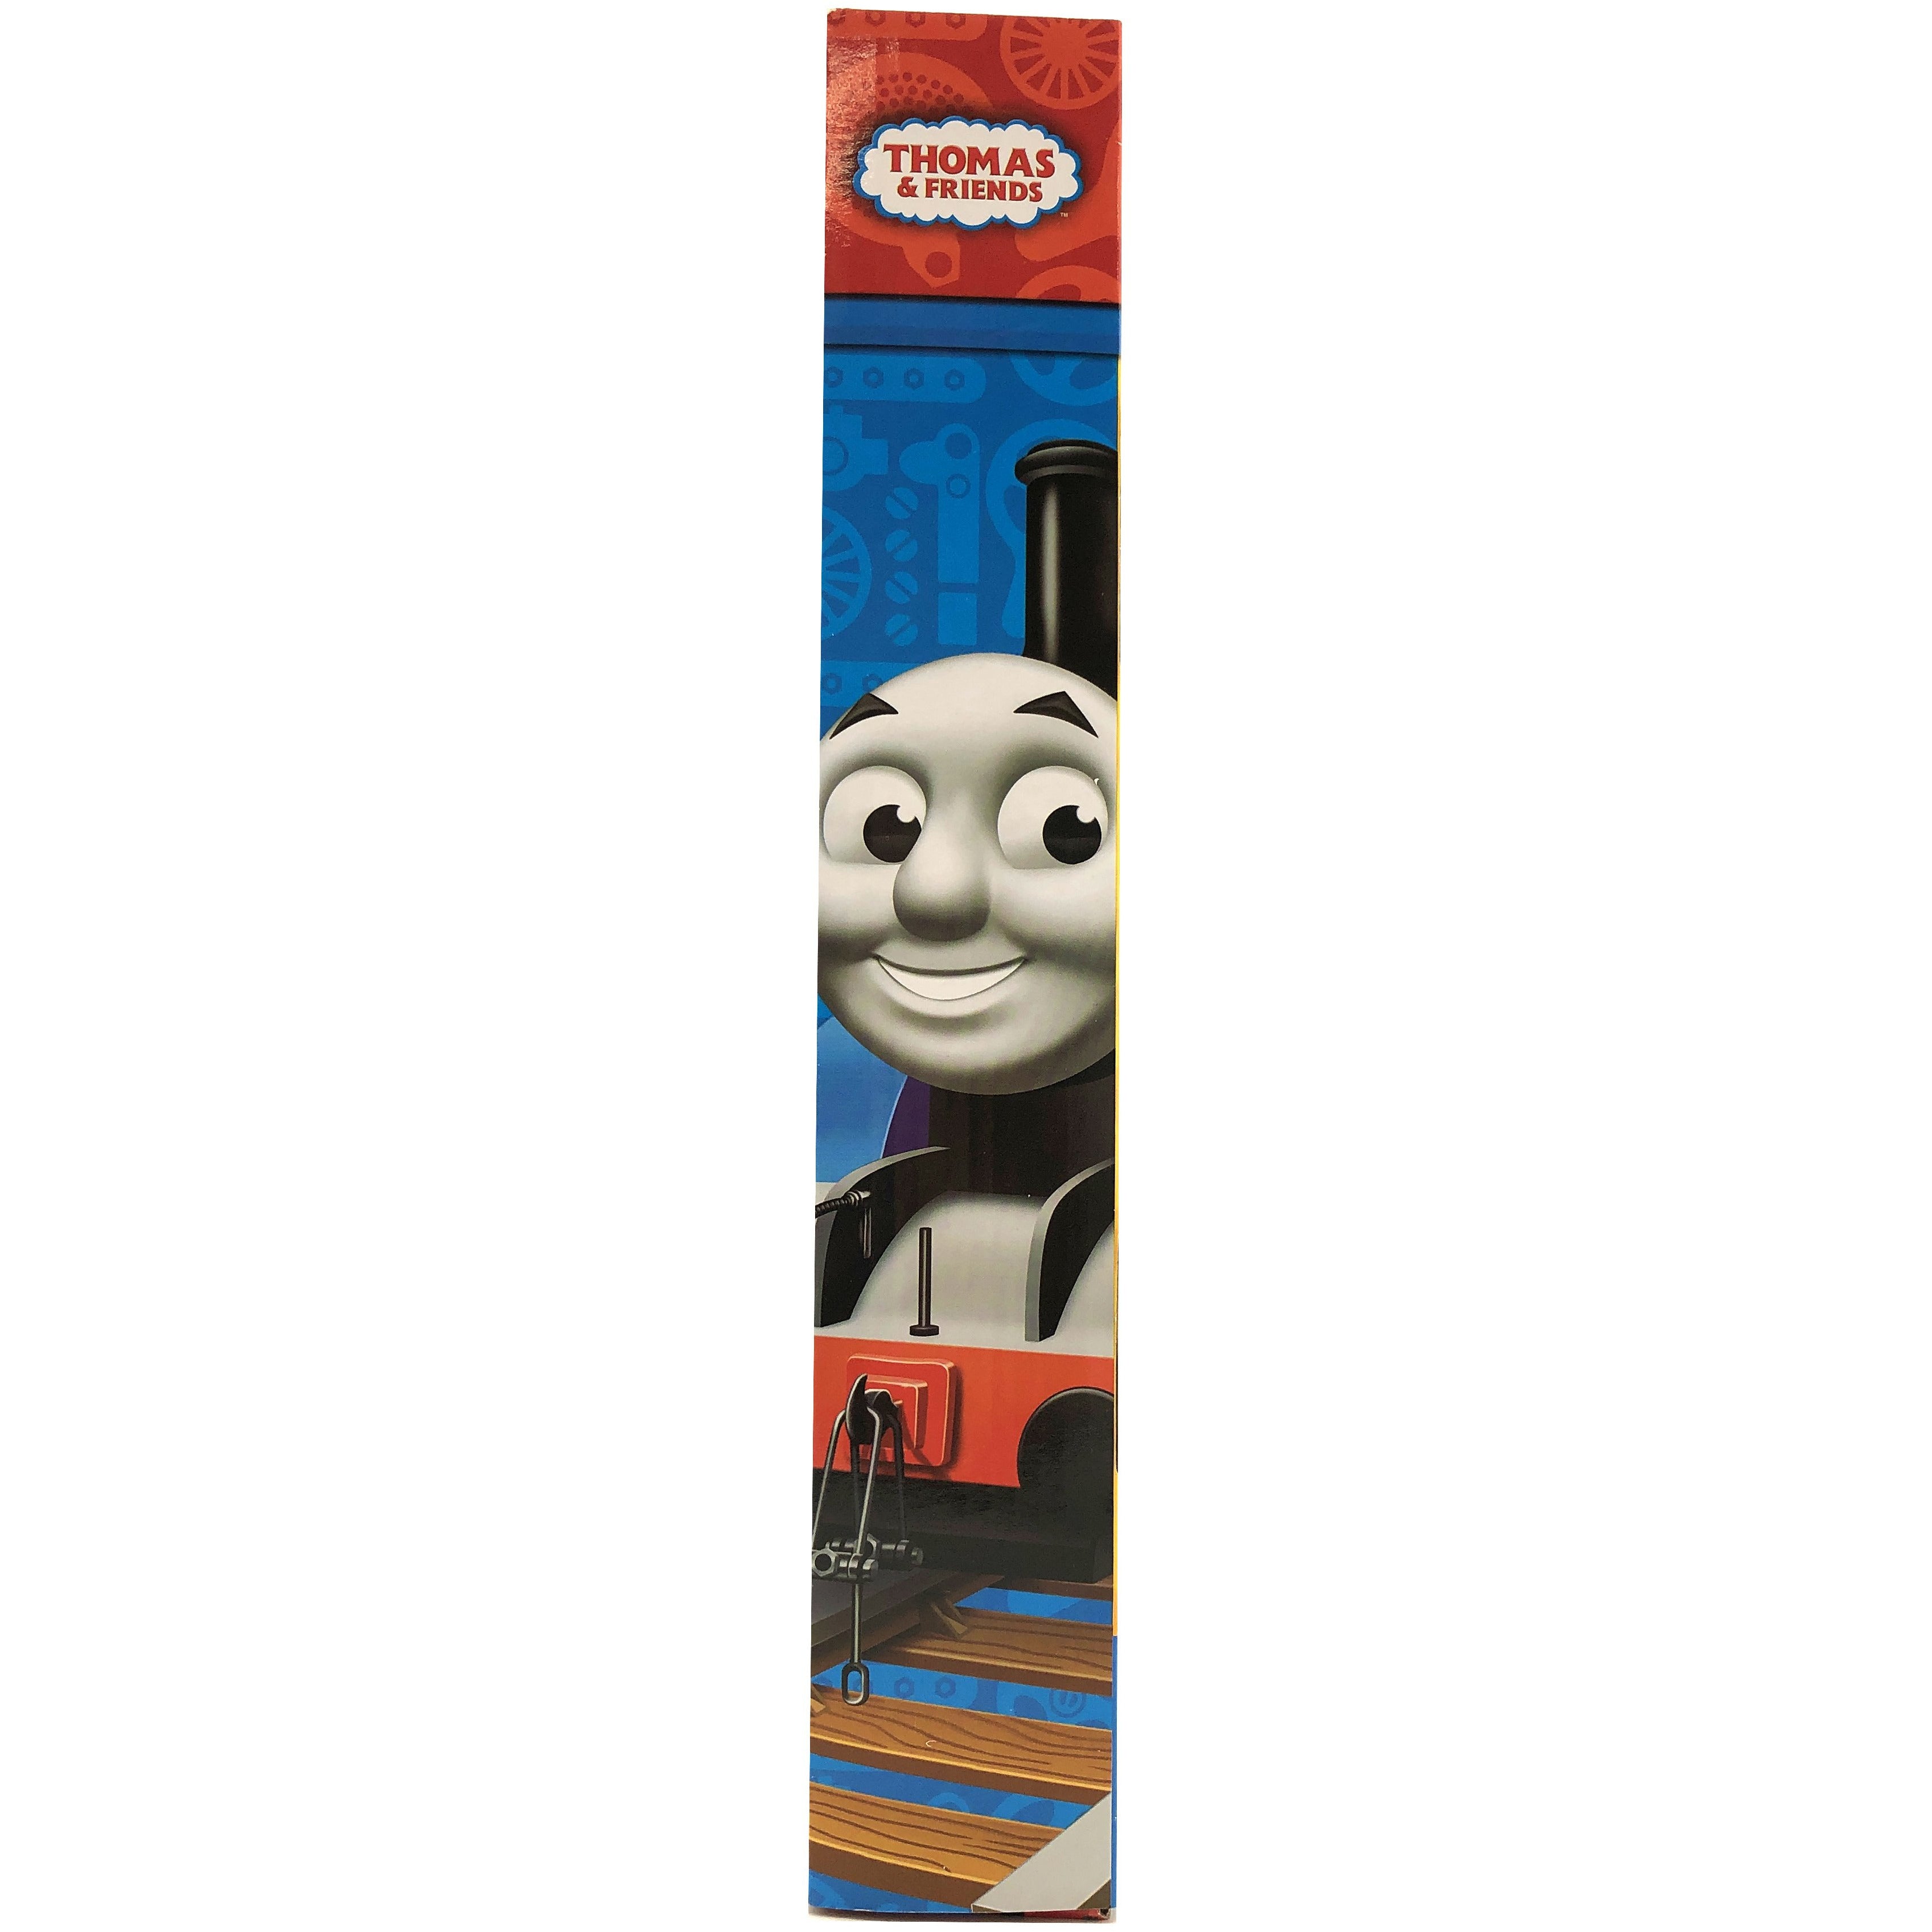 Thomas & Friends Board Book and Puzzle